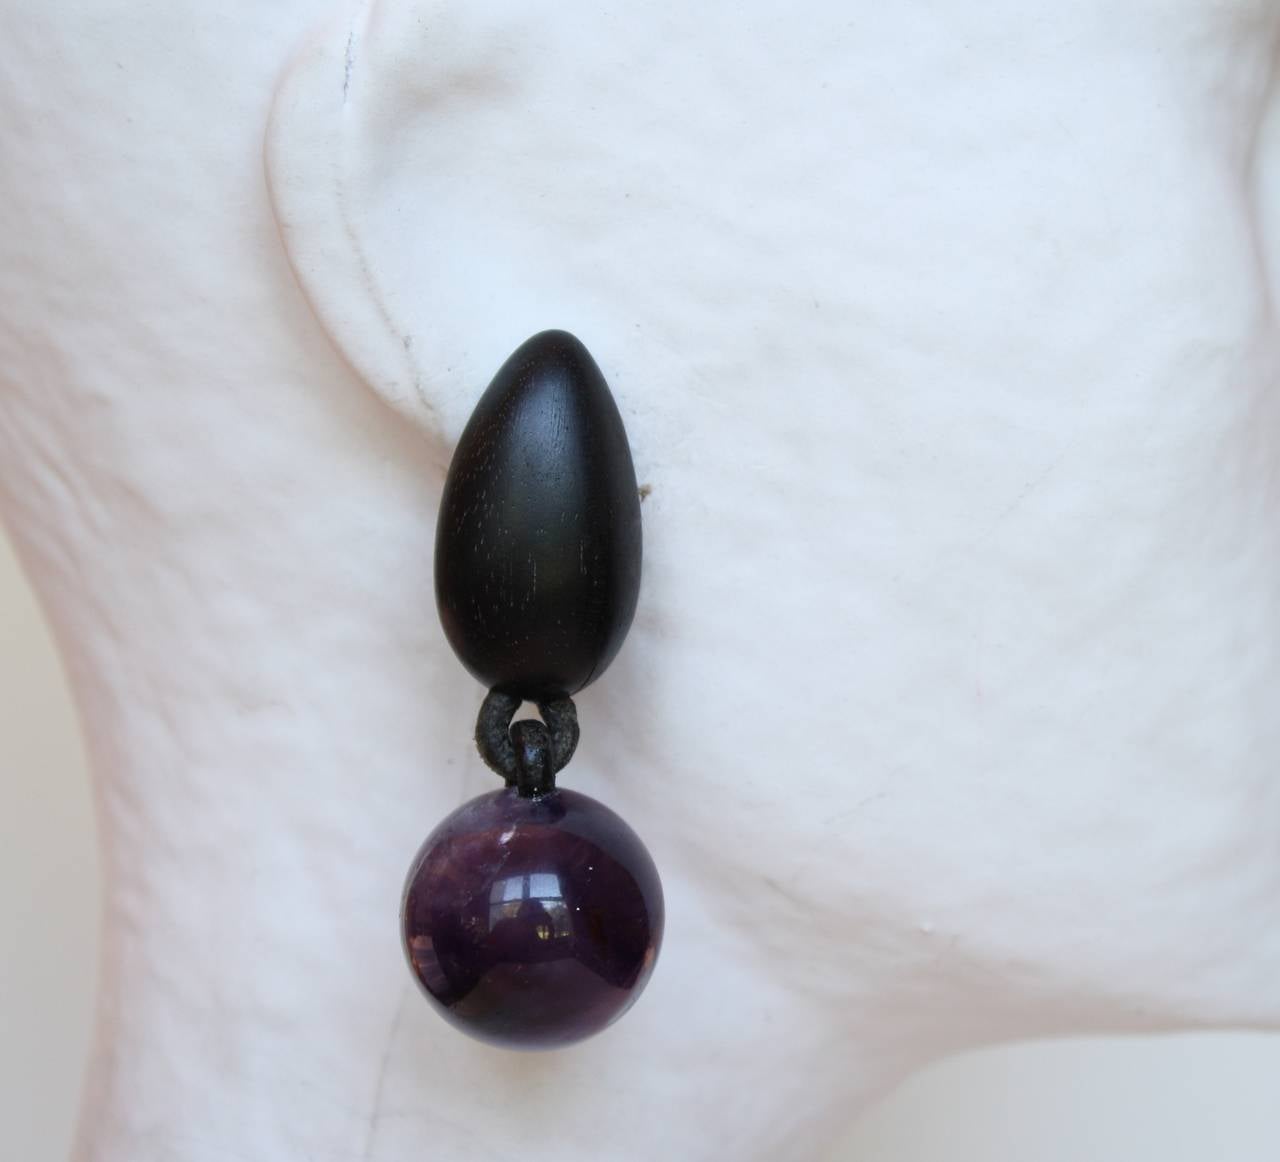 One-of-a-kind clip earrings from Monies, made with Ebony wood and purple amethyst.

2.5